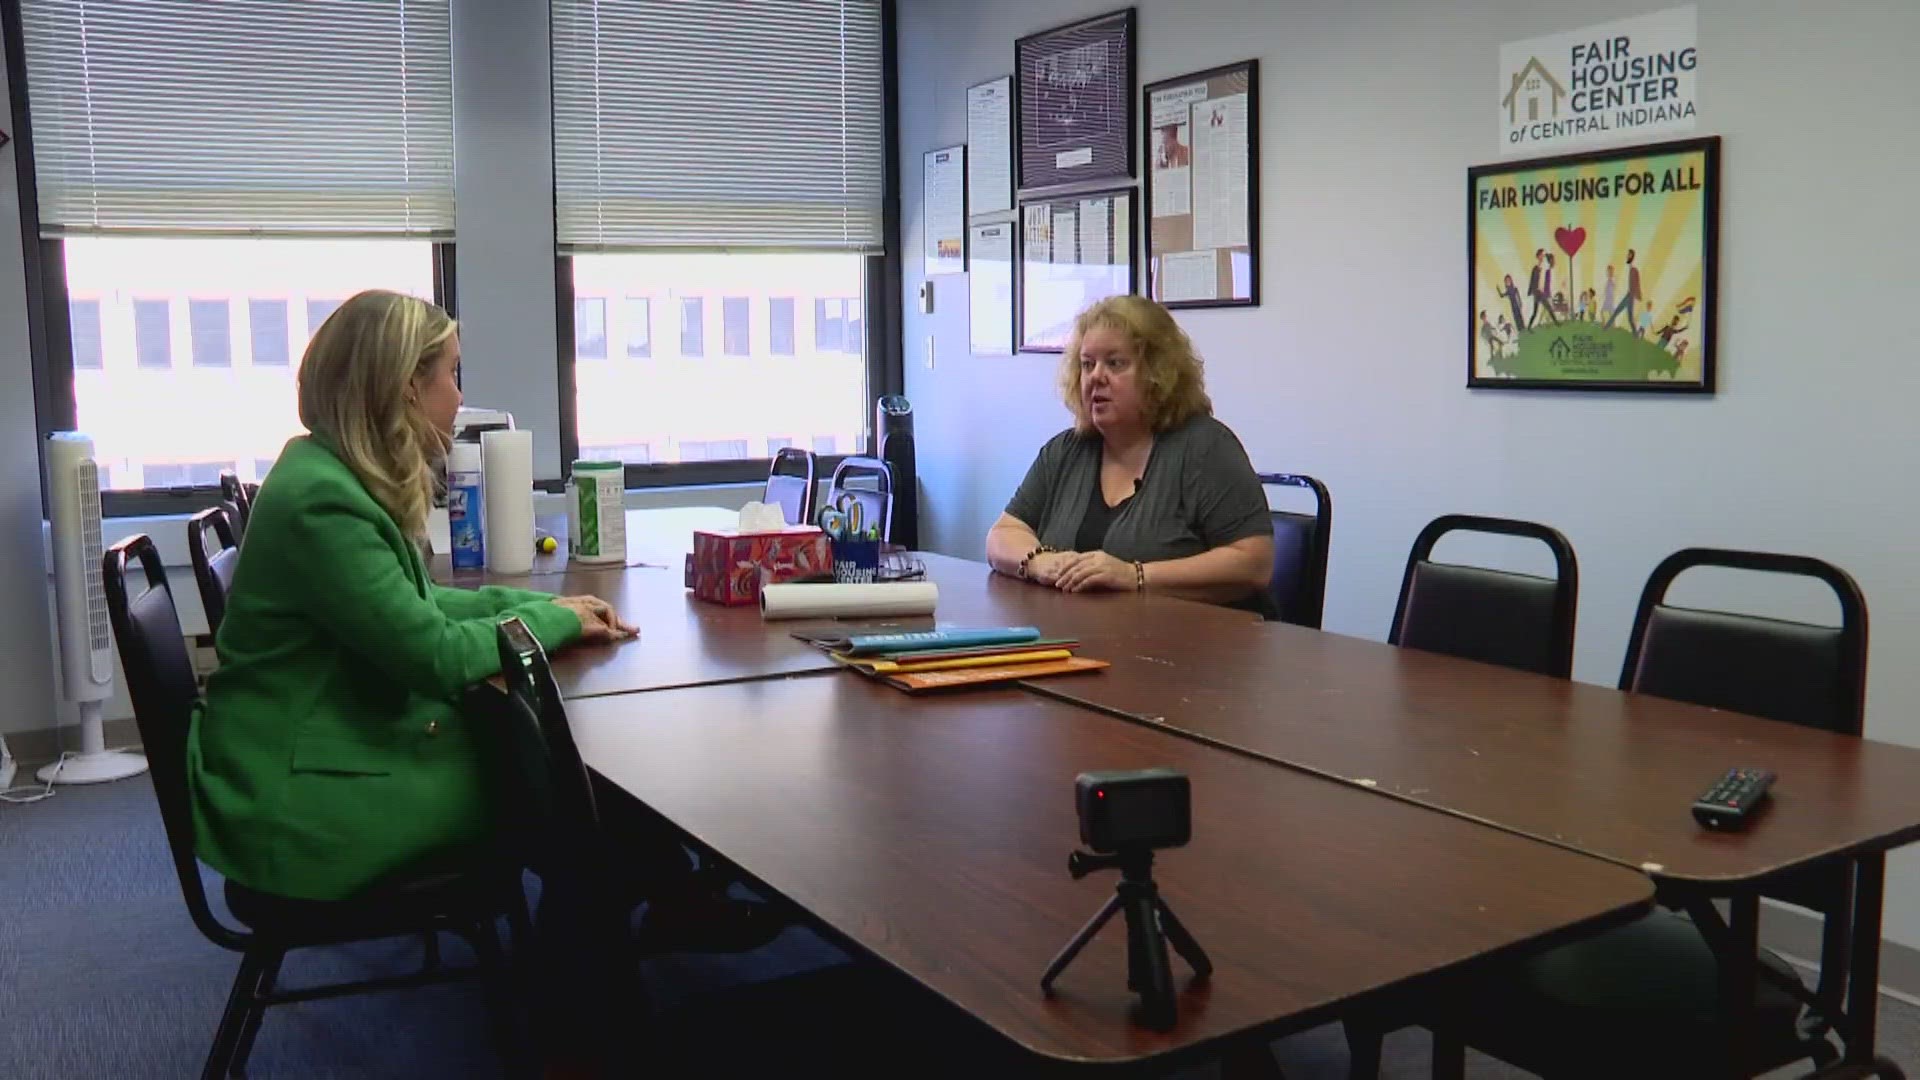 13News reporter Lauren Kostiuk takes a look at the housing issues facing people living in Marion County District 2 ahead of the 2023 elections.